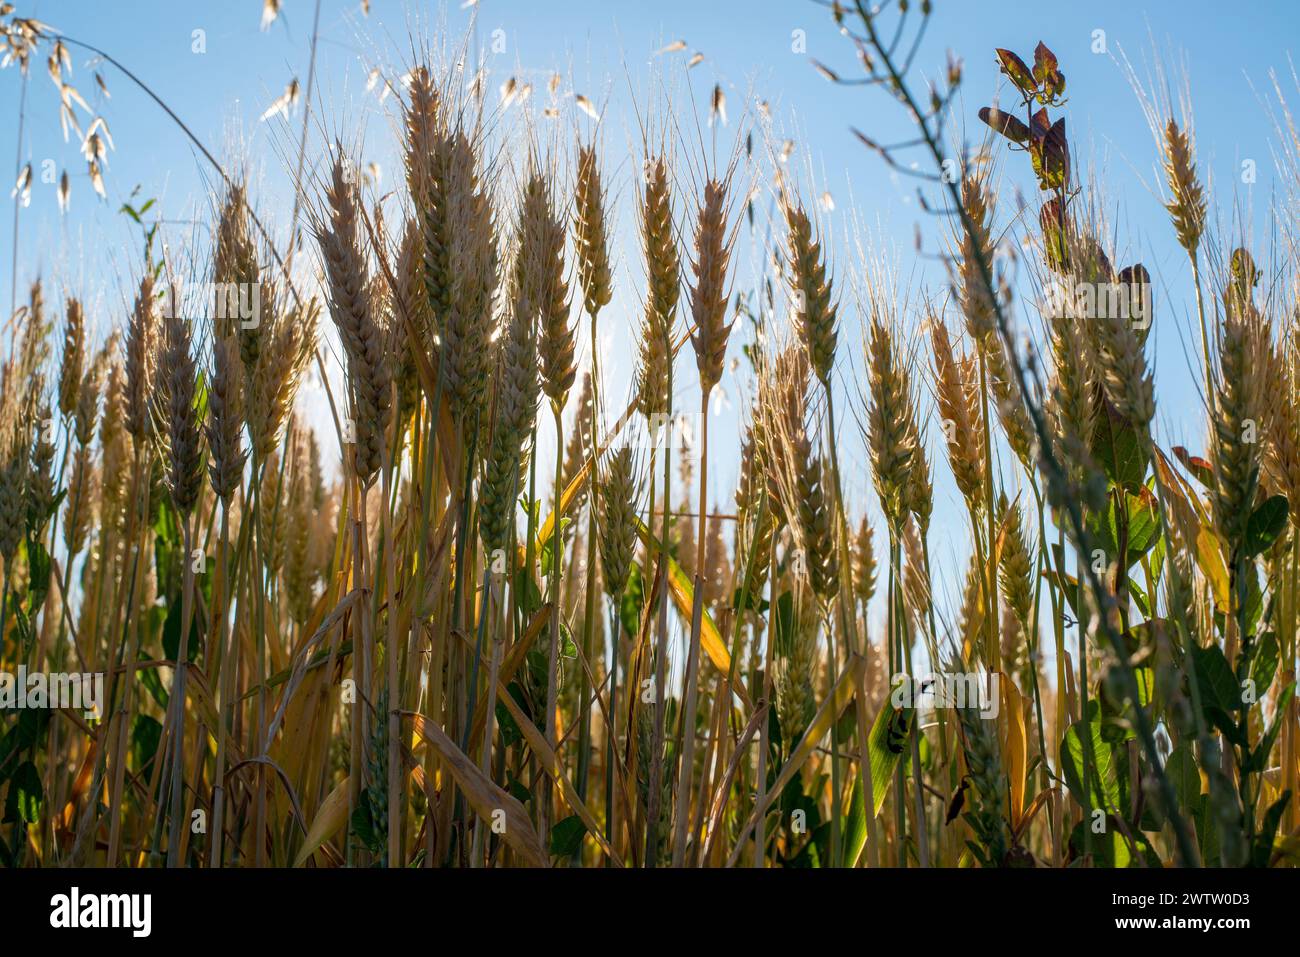 Golden wheat field with a butterfly Stock Photo